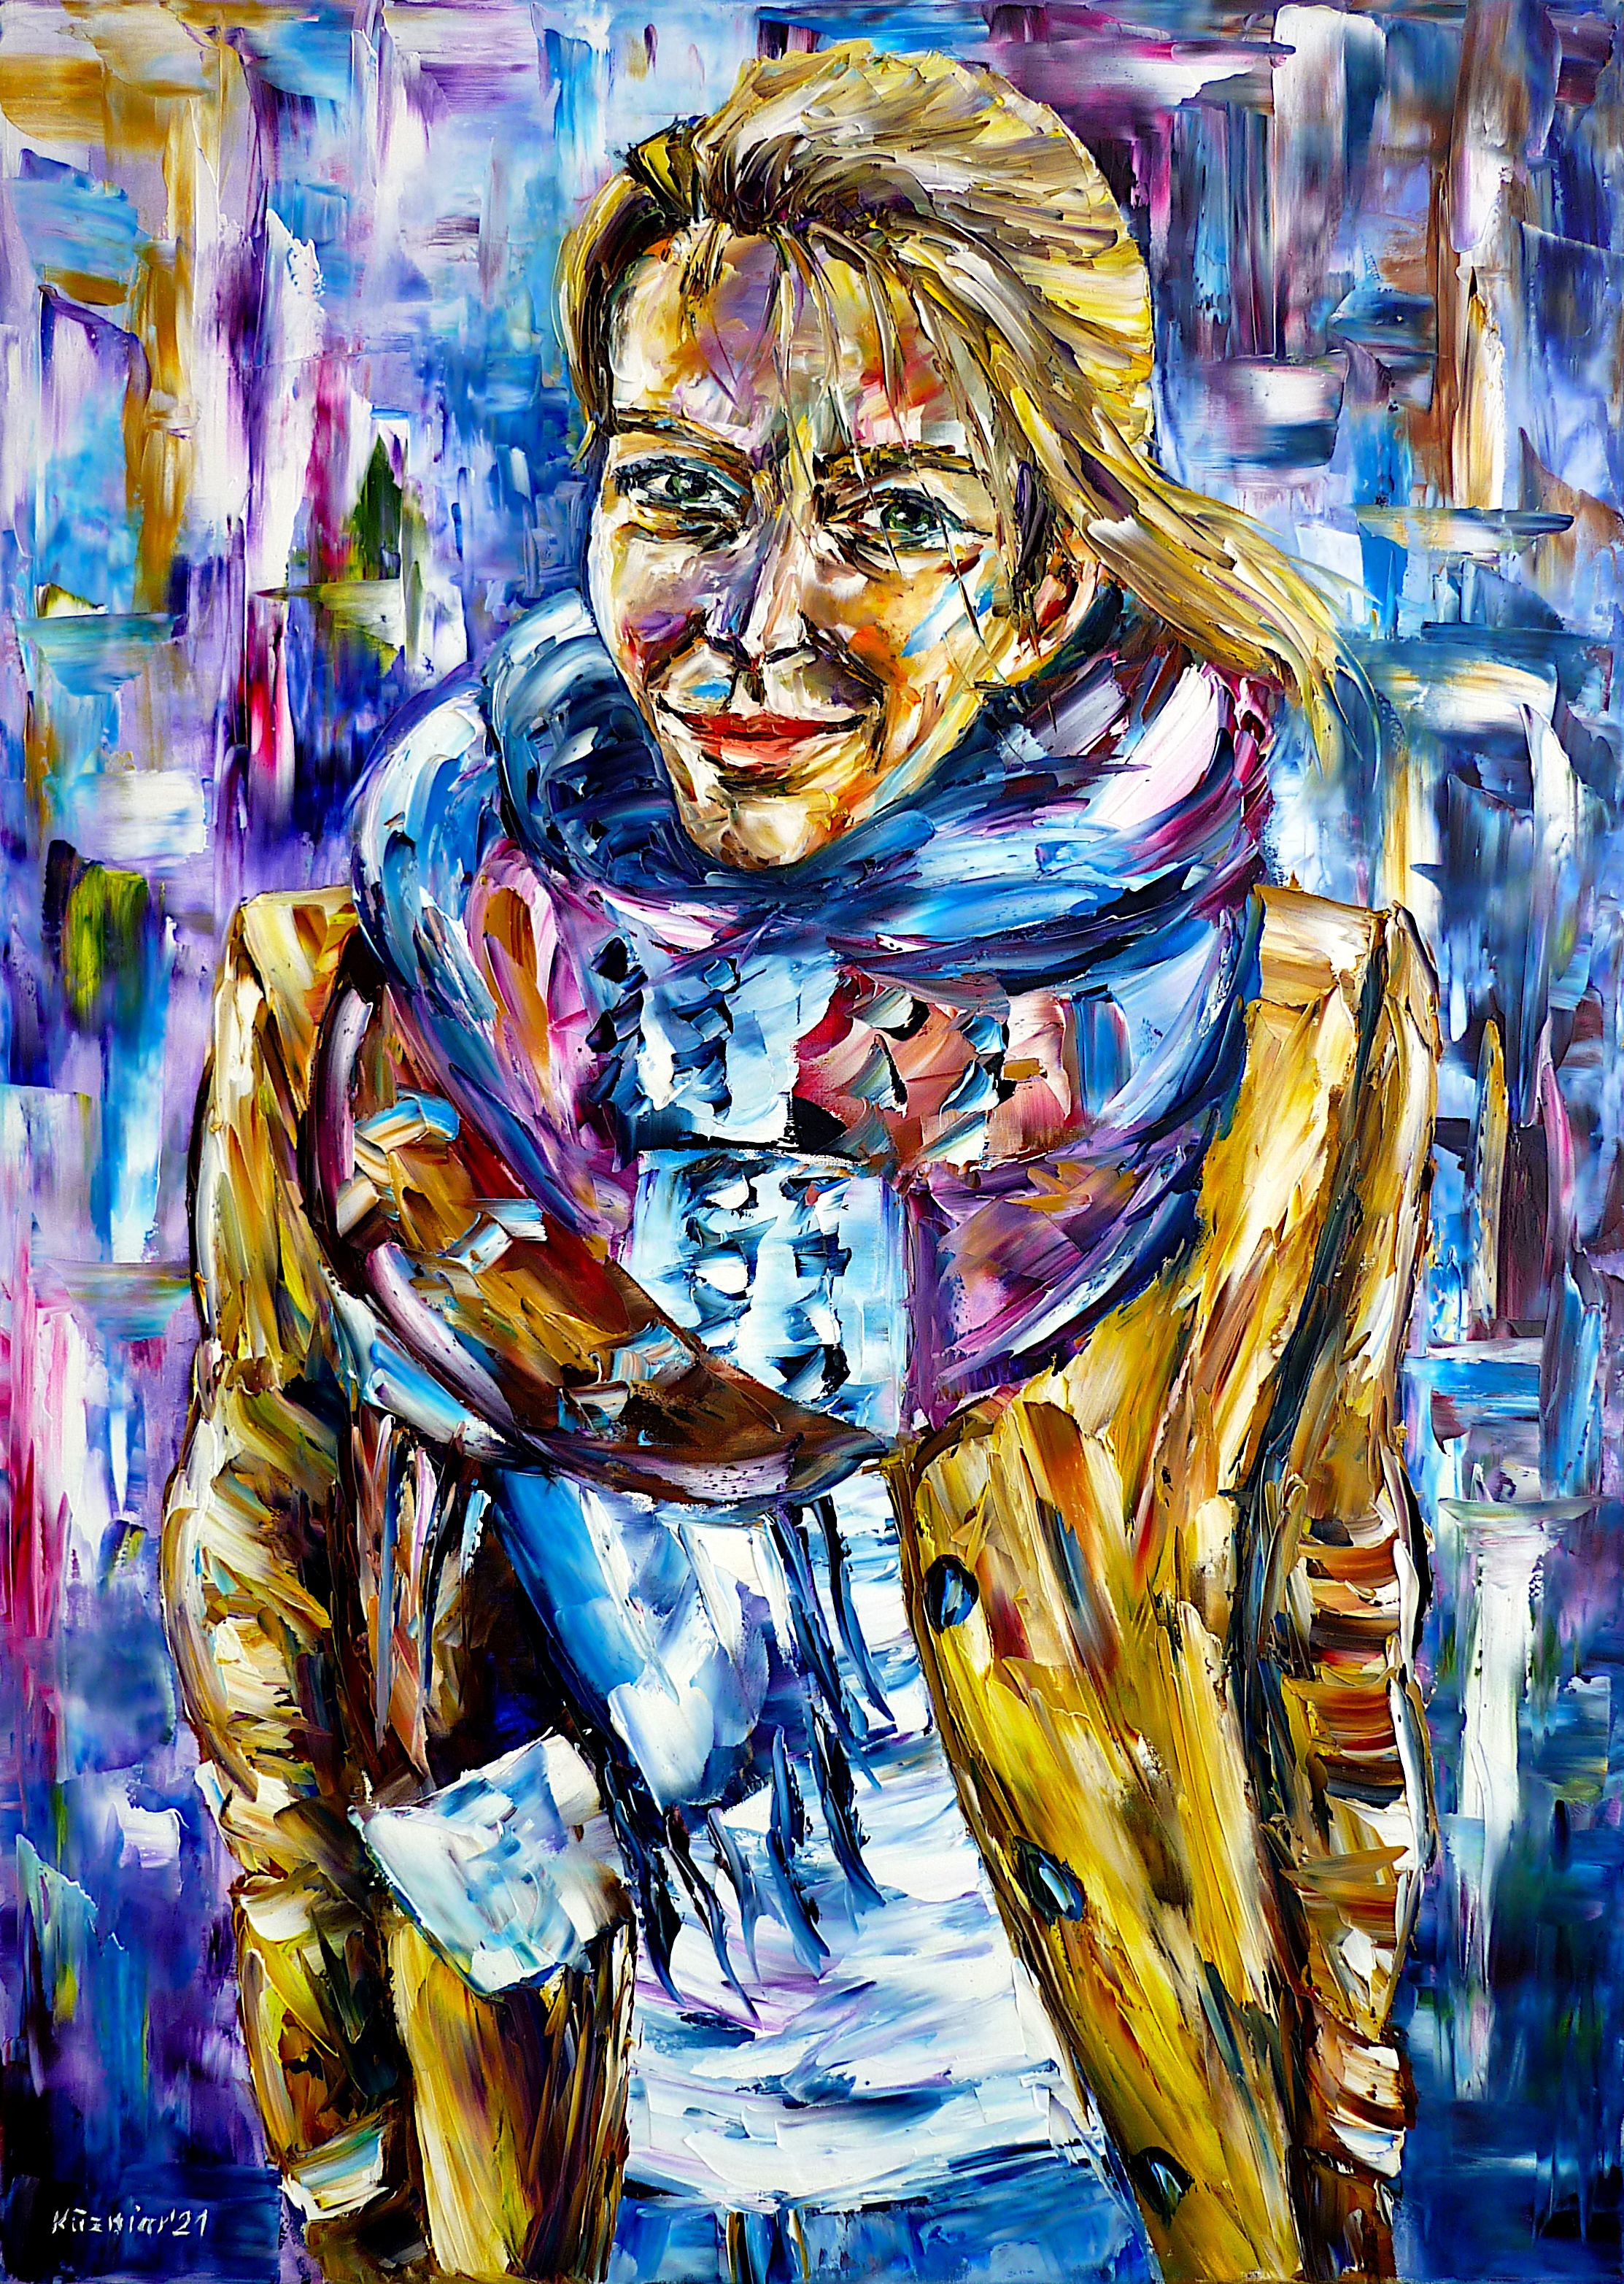 stephanie baczyk portrait, woman portrait, woman painting, woman in autumn, woman with scarf, blonde woman, tv presenter, television presenter, ard presenter, soccer presenter, german sports reporter, german sports journalist, abstract portrait, stephanie baczyk picture, stephanie baczyk painting, painting people, people abstract,woman abstract,smiling eyes,smiling mouth,joy,friendly picture,friendly painting,peace,peaceful picture,peaceful painting,palette knife oil painting,modernart,impressionism,expressionism,figurative,abstract painting,lively colours,colorful painting,bright colors,light reflections,impasto painting,living room art,living room picture,living room painting